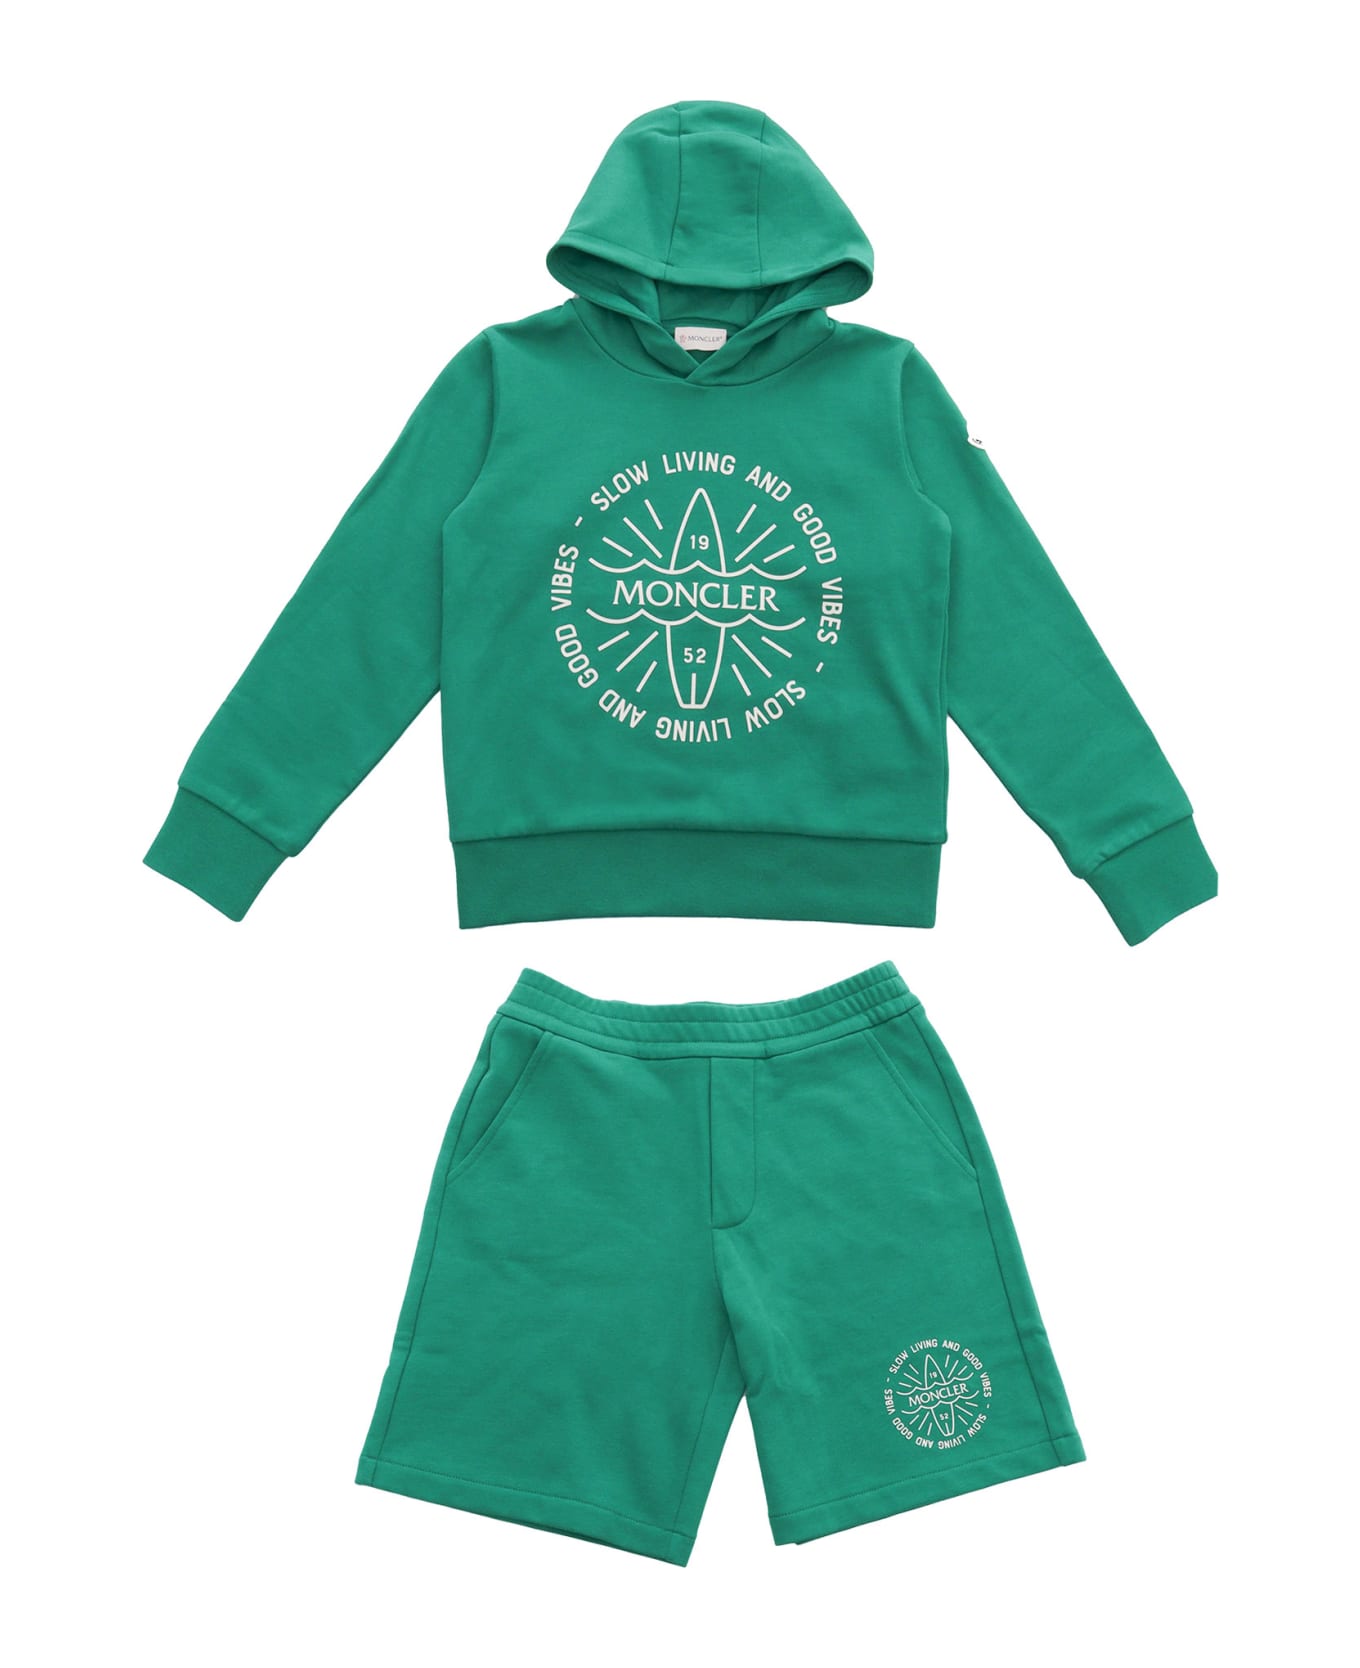 Moncler Green Sports Suit - GREEN ジャンプスーツ